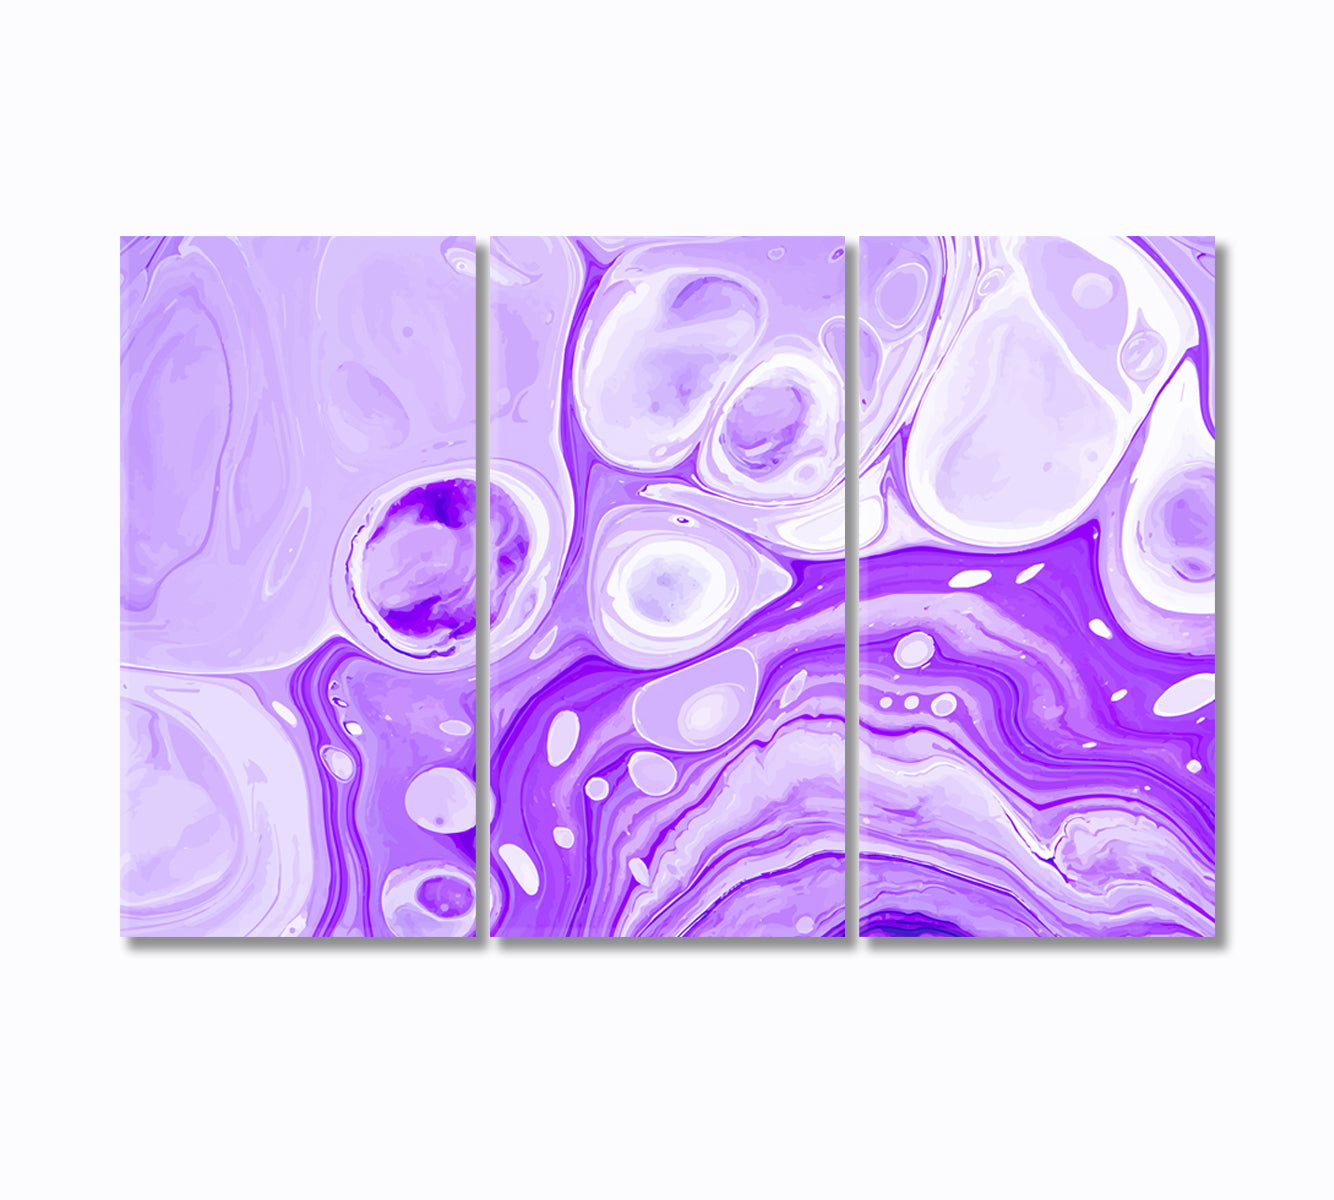 Abstract Purple and White Bubble Canvas Print-Canvas Print-CetArt-3 Panels-36x24 inches-CetArt